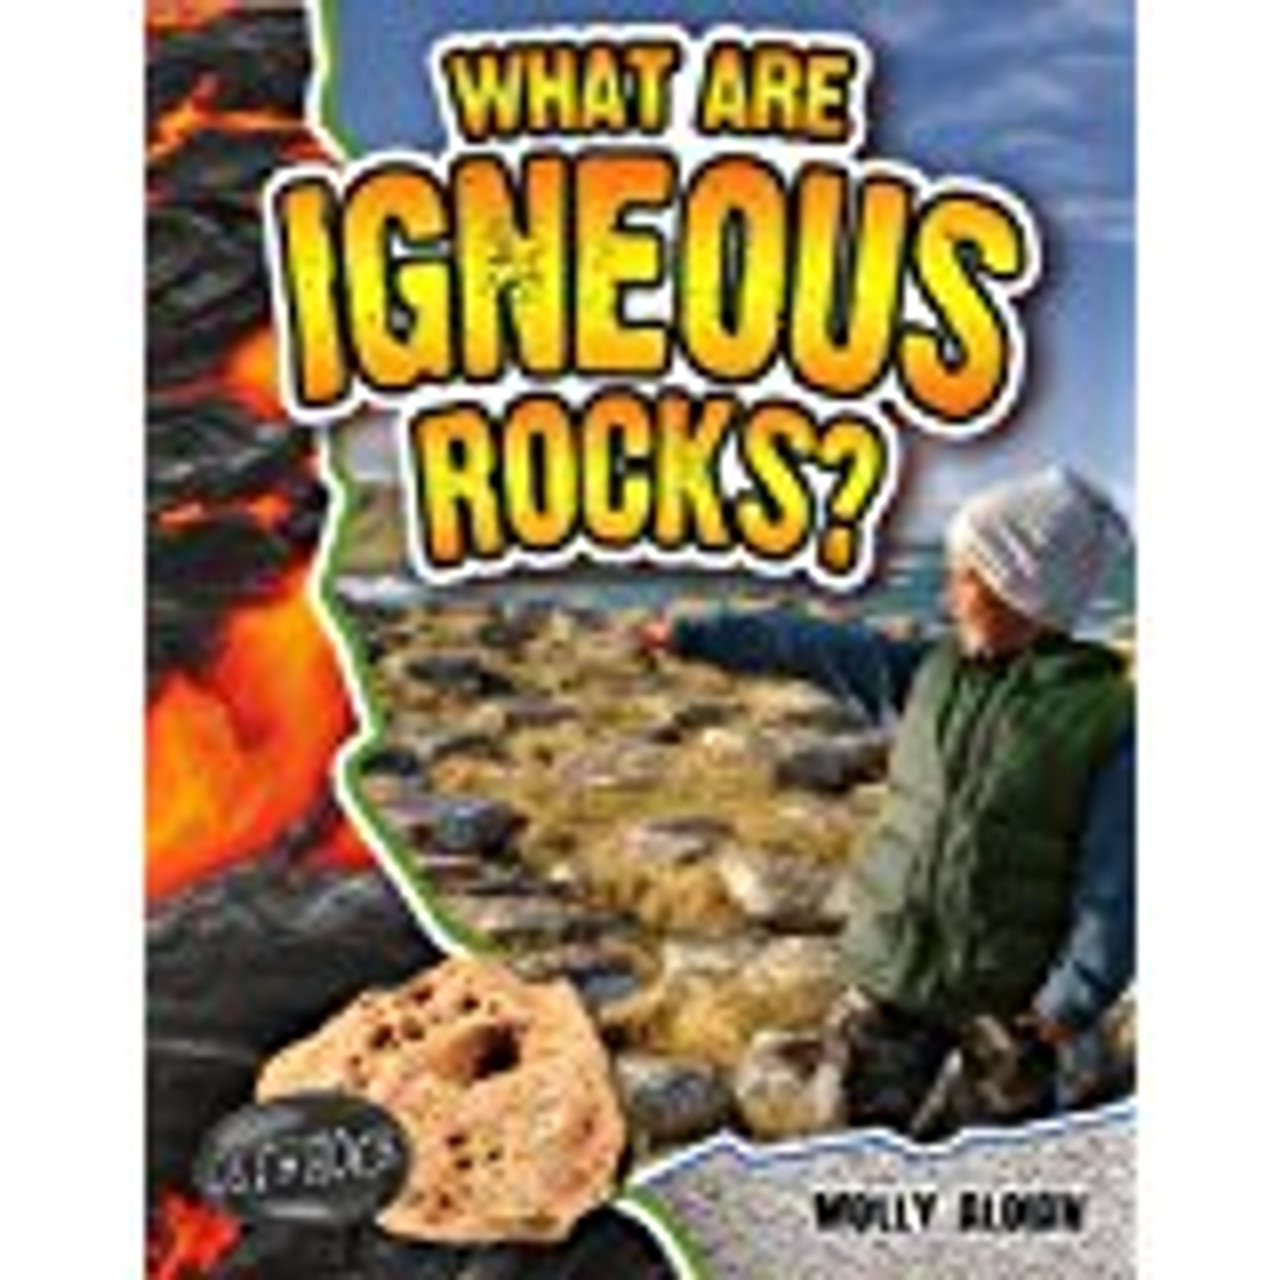 <p>Igneous rock has a dramatic beginning it requires red-hot volcanic activity. This fact-filled book explains how granite, lava, basalt, silica, quartz and feldspar are formed after hot, molten rock cools. Readers will also learn about volcanoes and tectonic plates, the minerals that make up igneous rocks, and the crystallization of rock material.</p>